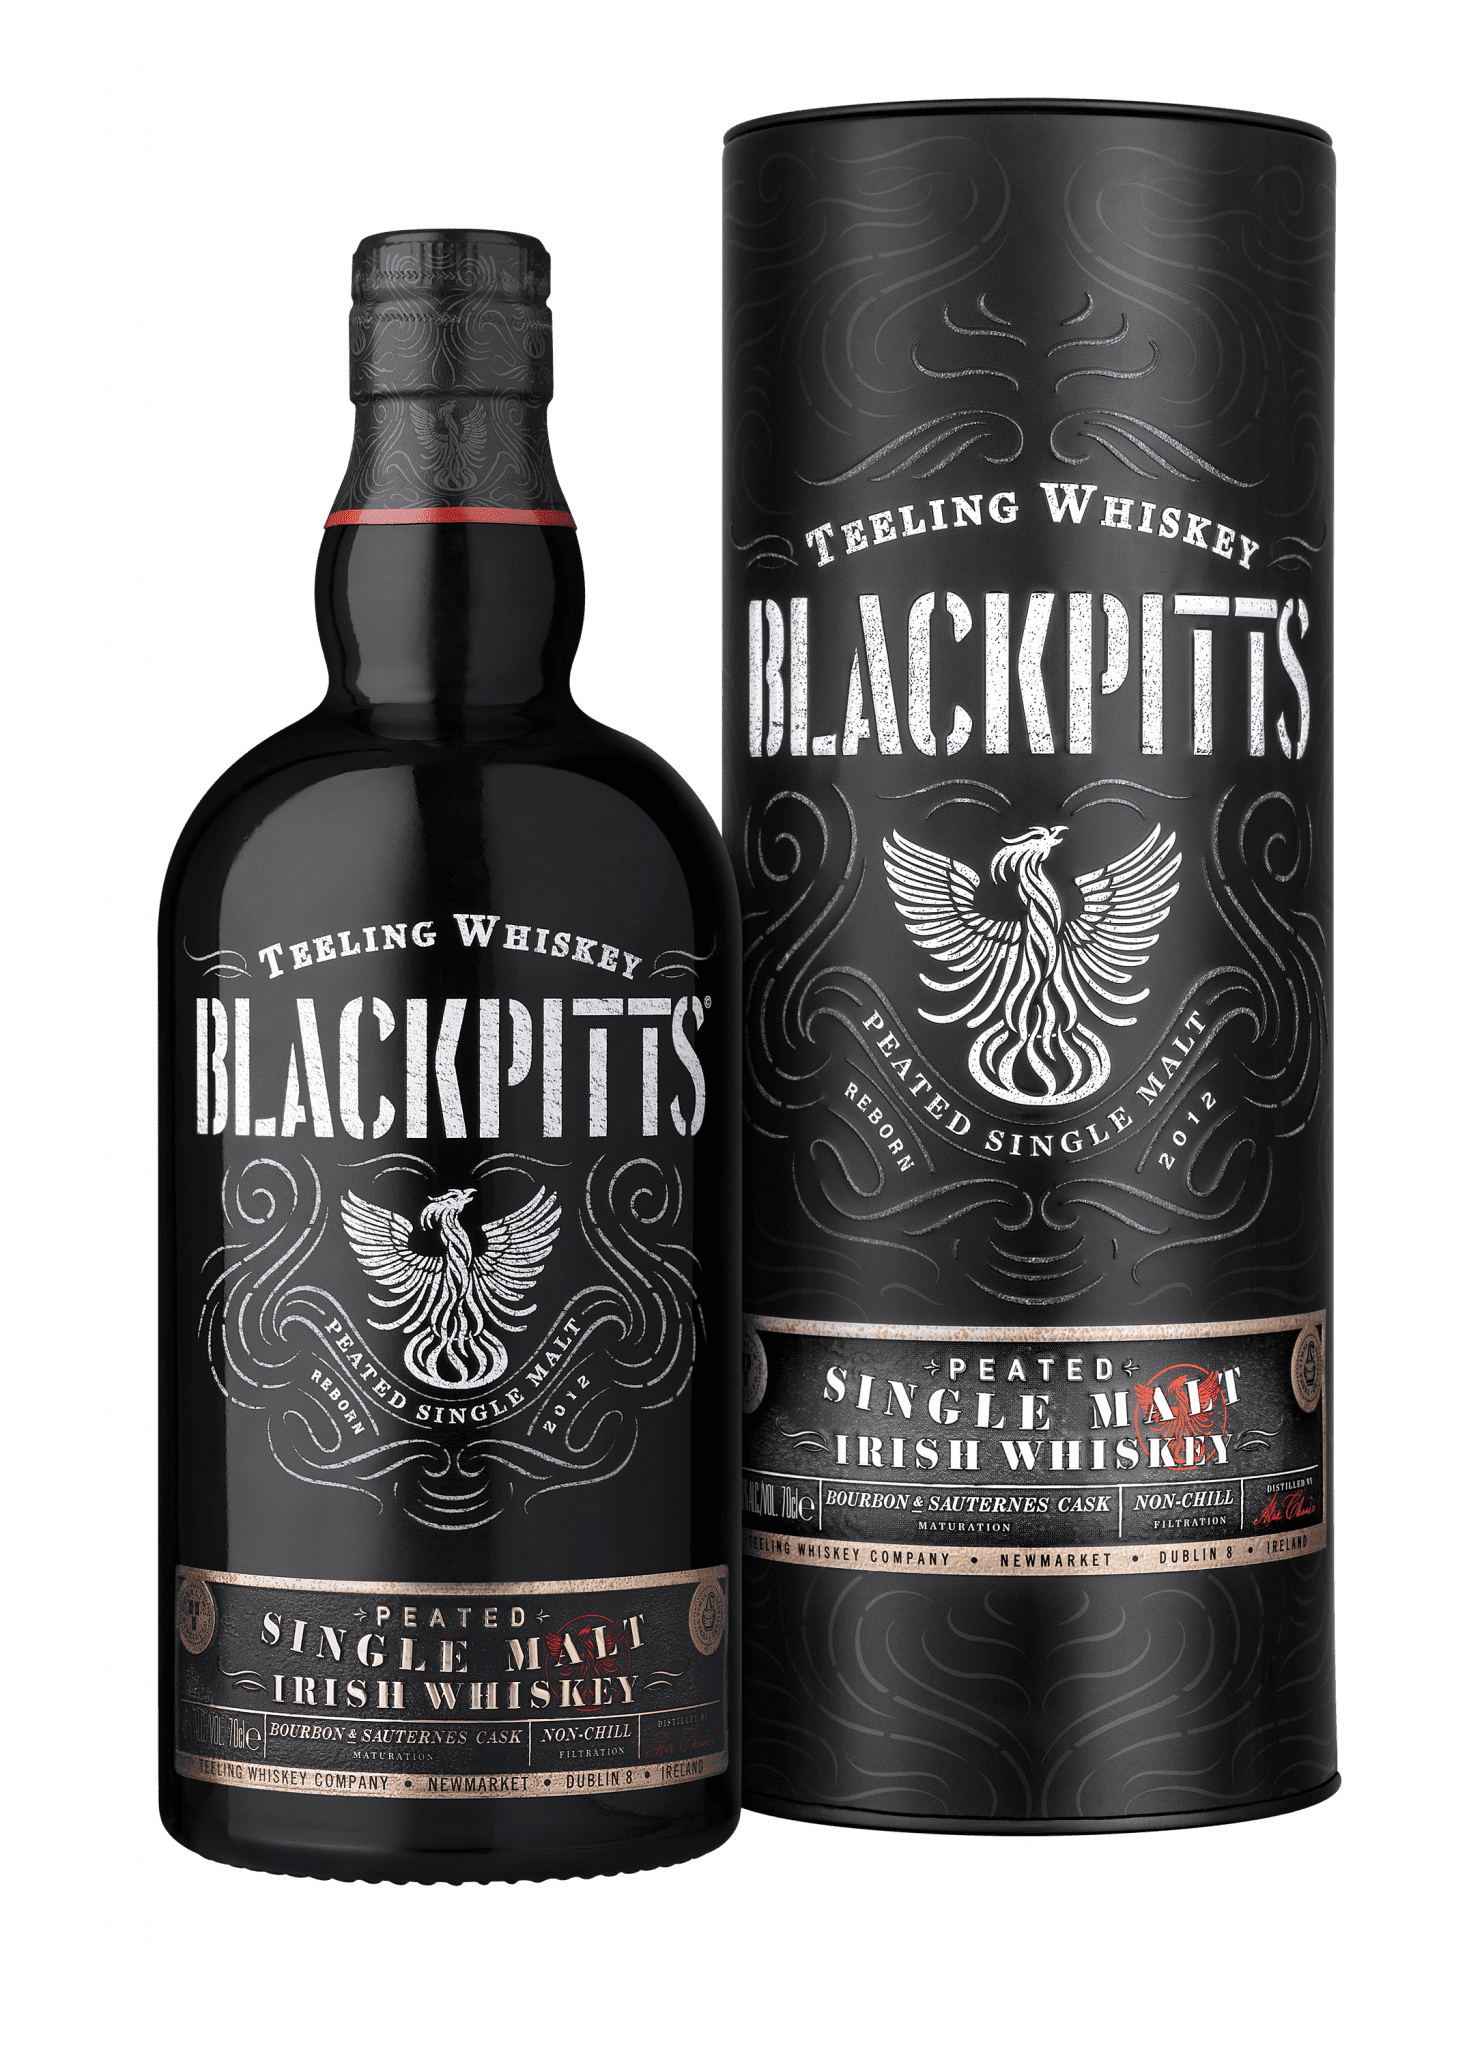 Teeling Blackpitts Single Malt Irish Whiskey Whiskey Blogger Stuart Mcnamara Teeling Whiskey Unveils Blackpitts Irish Whiskey First Dublin Distilled Peated Single Malt Blackpitts is the Second Release from Their New Dublin Distillery and Continues Its Unconventional Approach to Expanding the Irish Whiskey Category Read More at Whiskey Blogger International Whiskey Reviews by Irish Whiskey Blogger Stuart Mcnamara